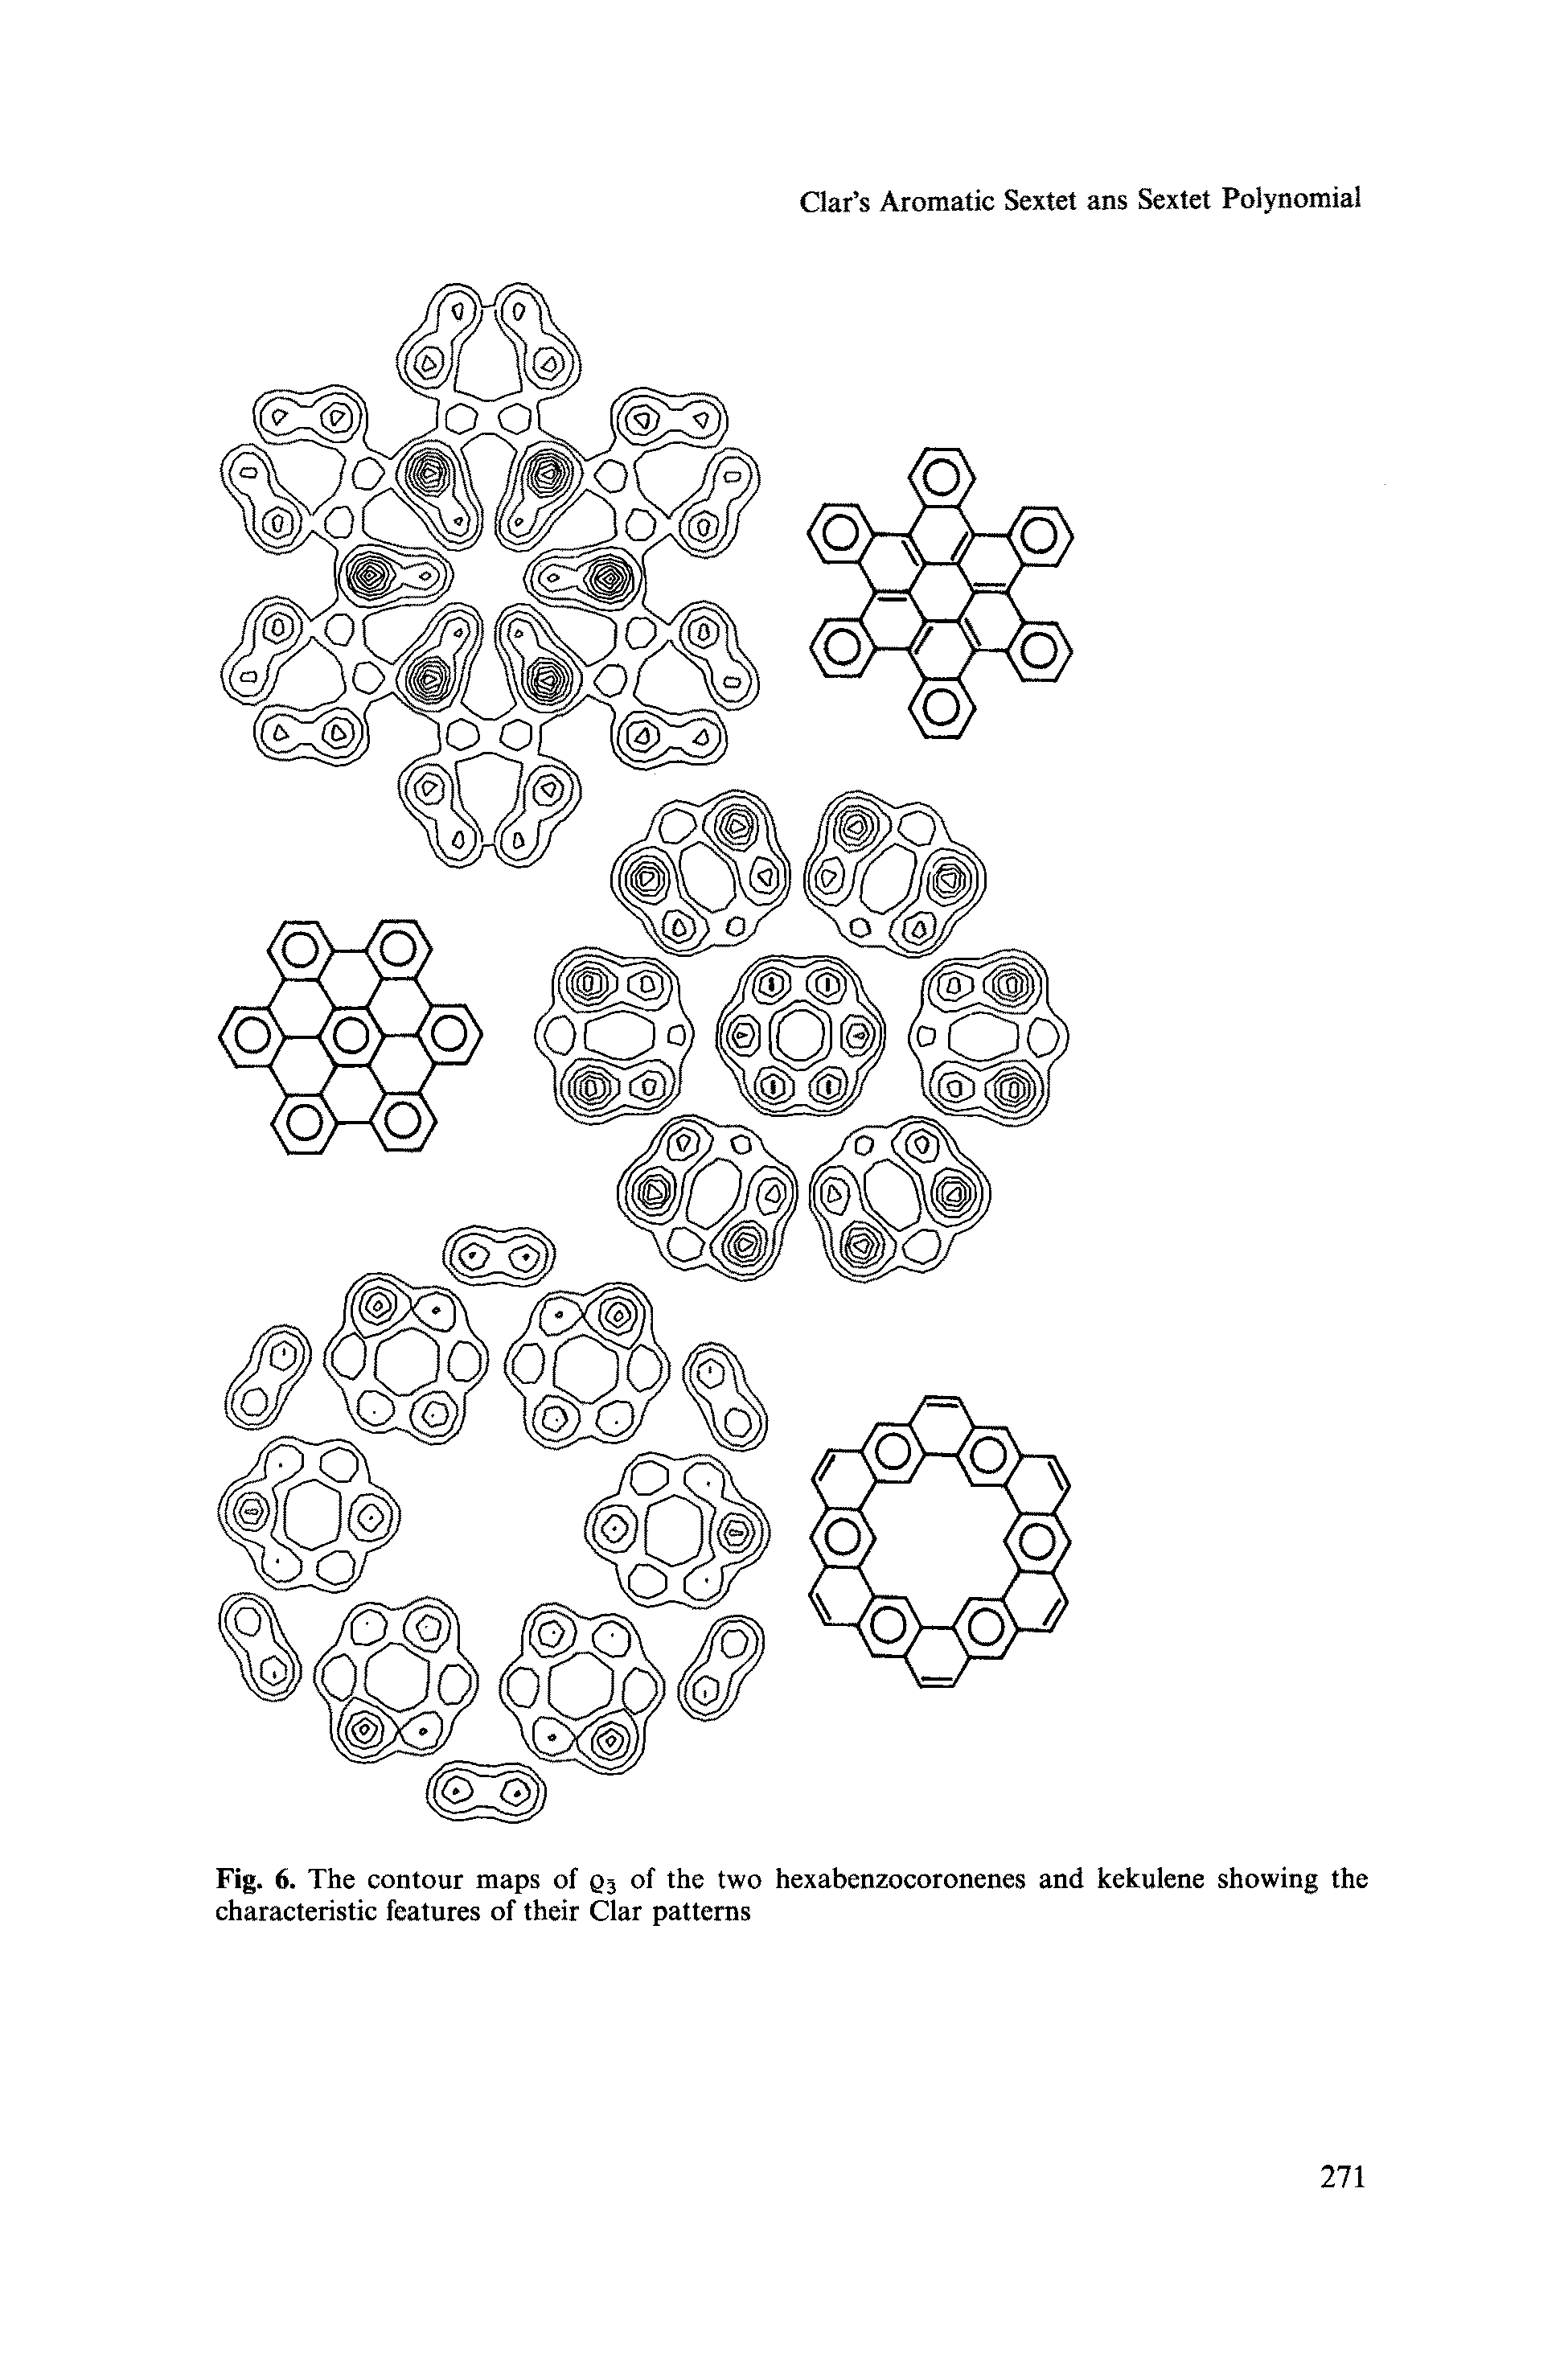 Fig. 6. The contour maps of q3 of the two hexabenzocoronenes and kekulene showing the characteristic features of their Clar patterns...